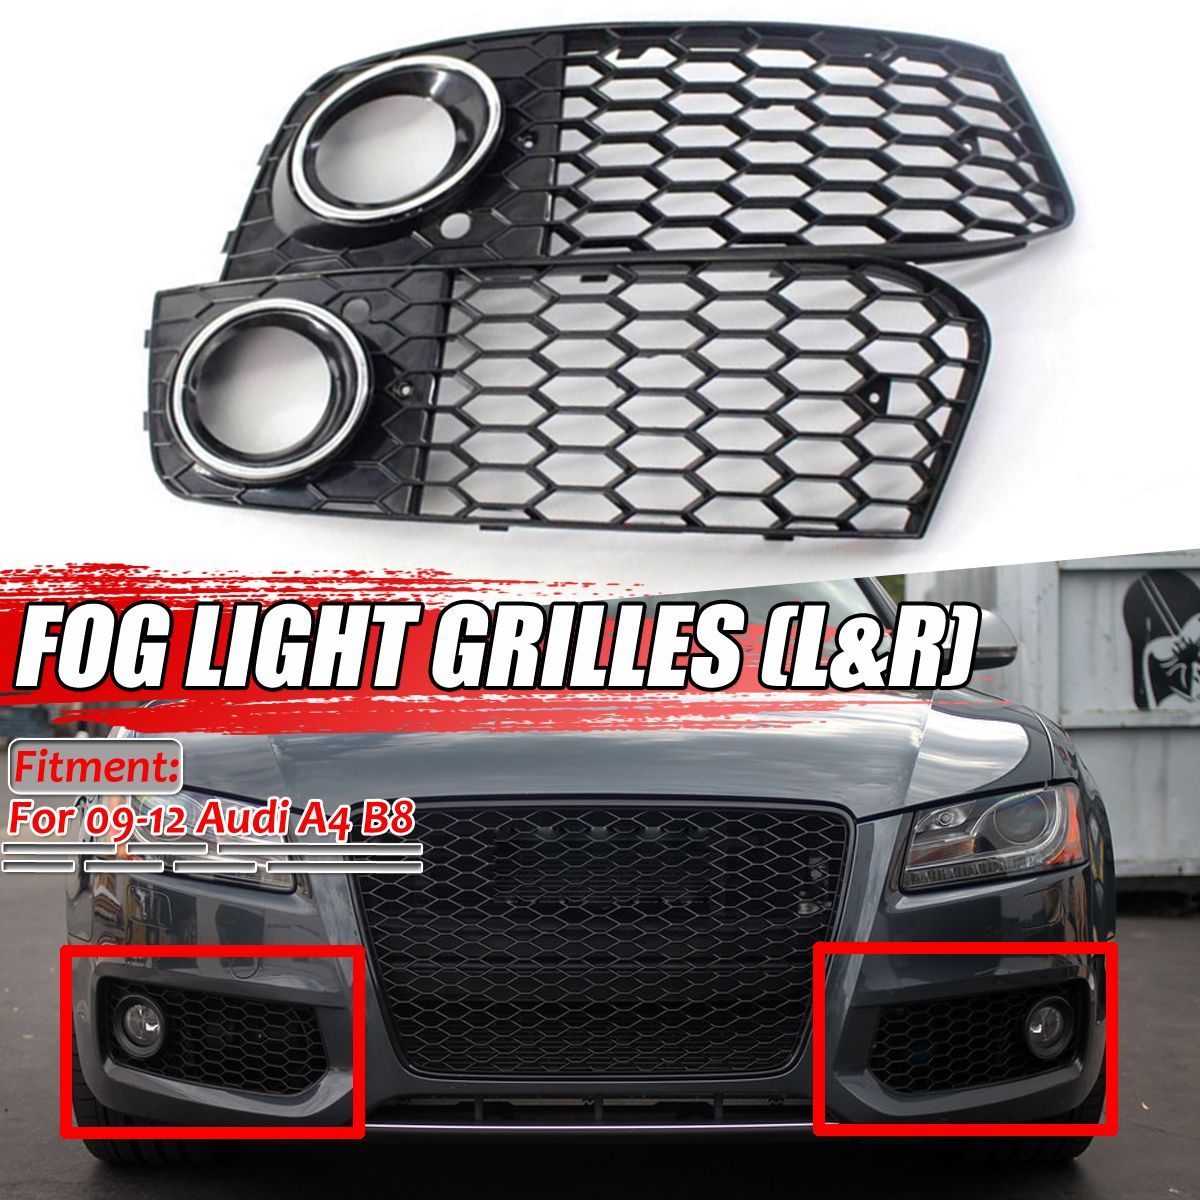 Pair-Glossy-Black-Front-Bumper-Fog-Light-Grille-Grill-Cover-For-Audi-A4-B8-RS4-style-2009-2012-1664521